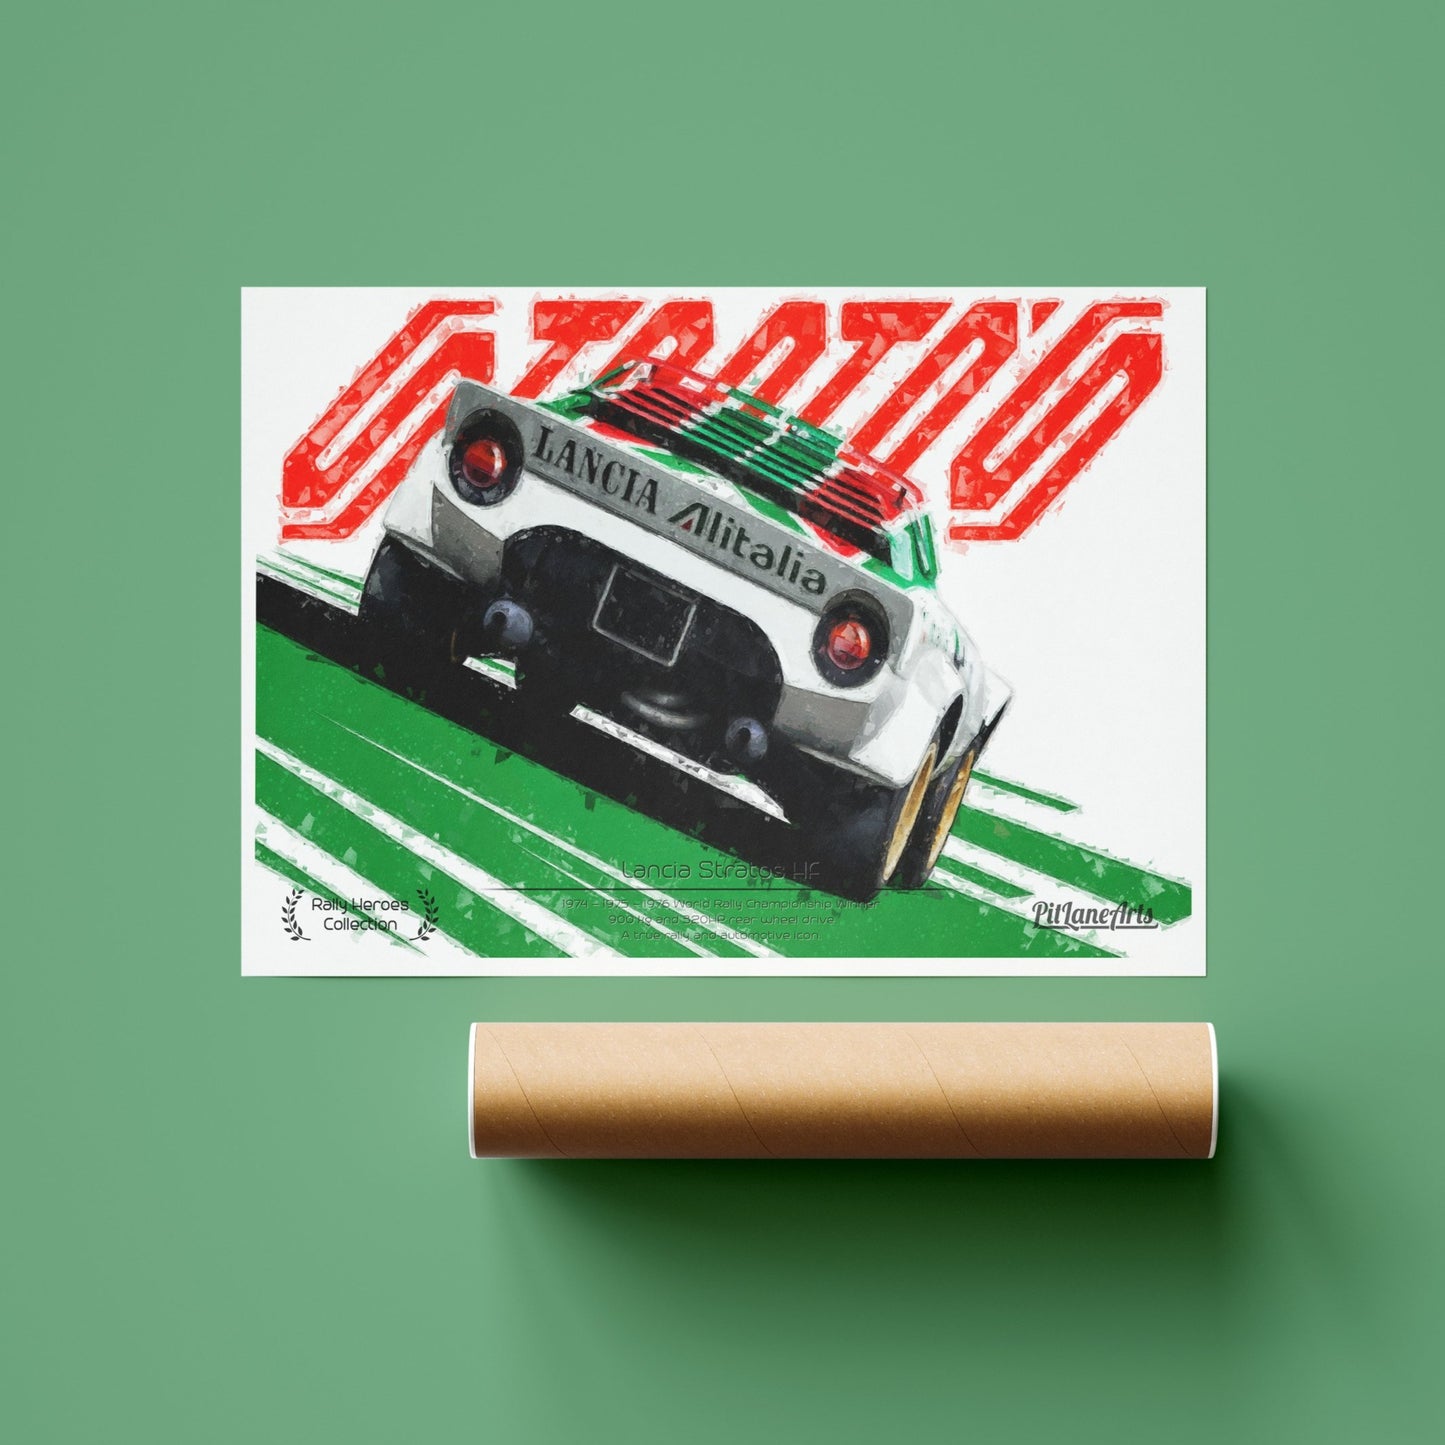 Lancia Stratos Poster print with delivery tube - PitLaneArts